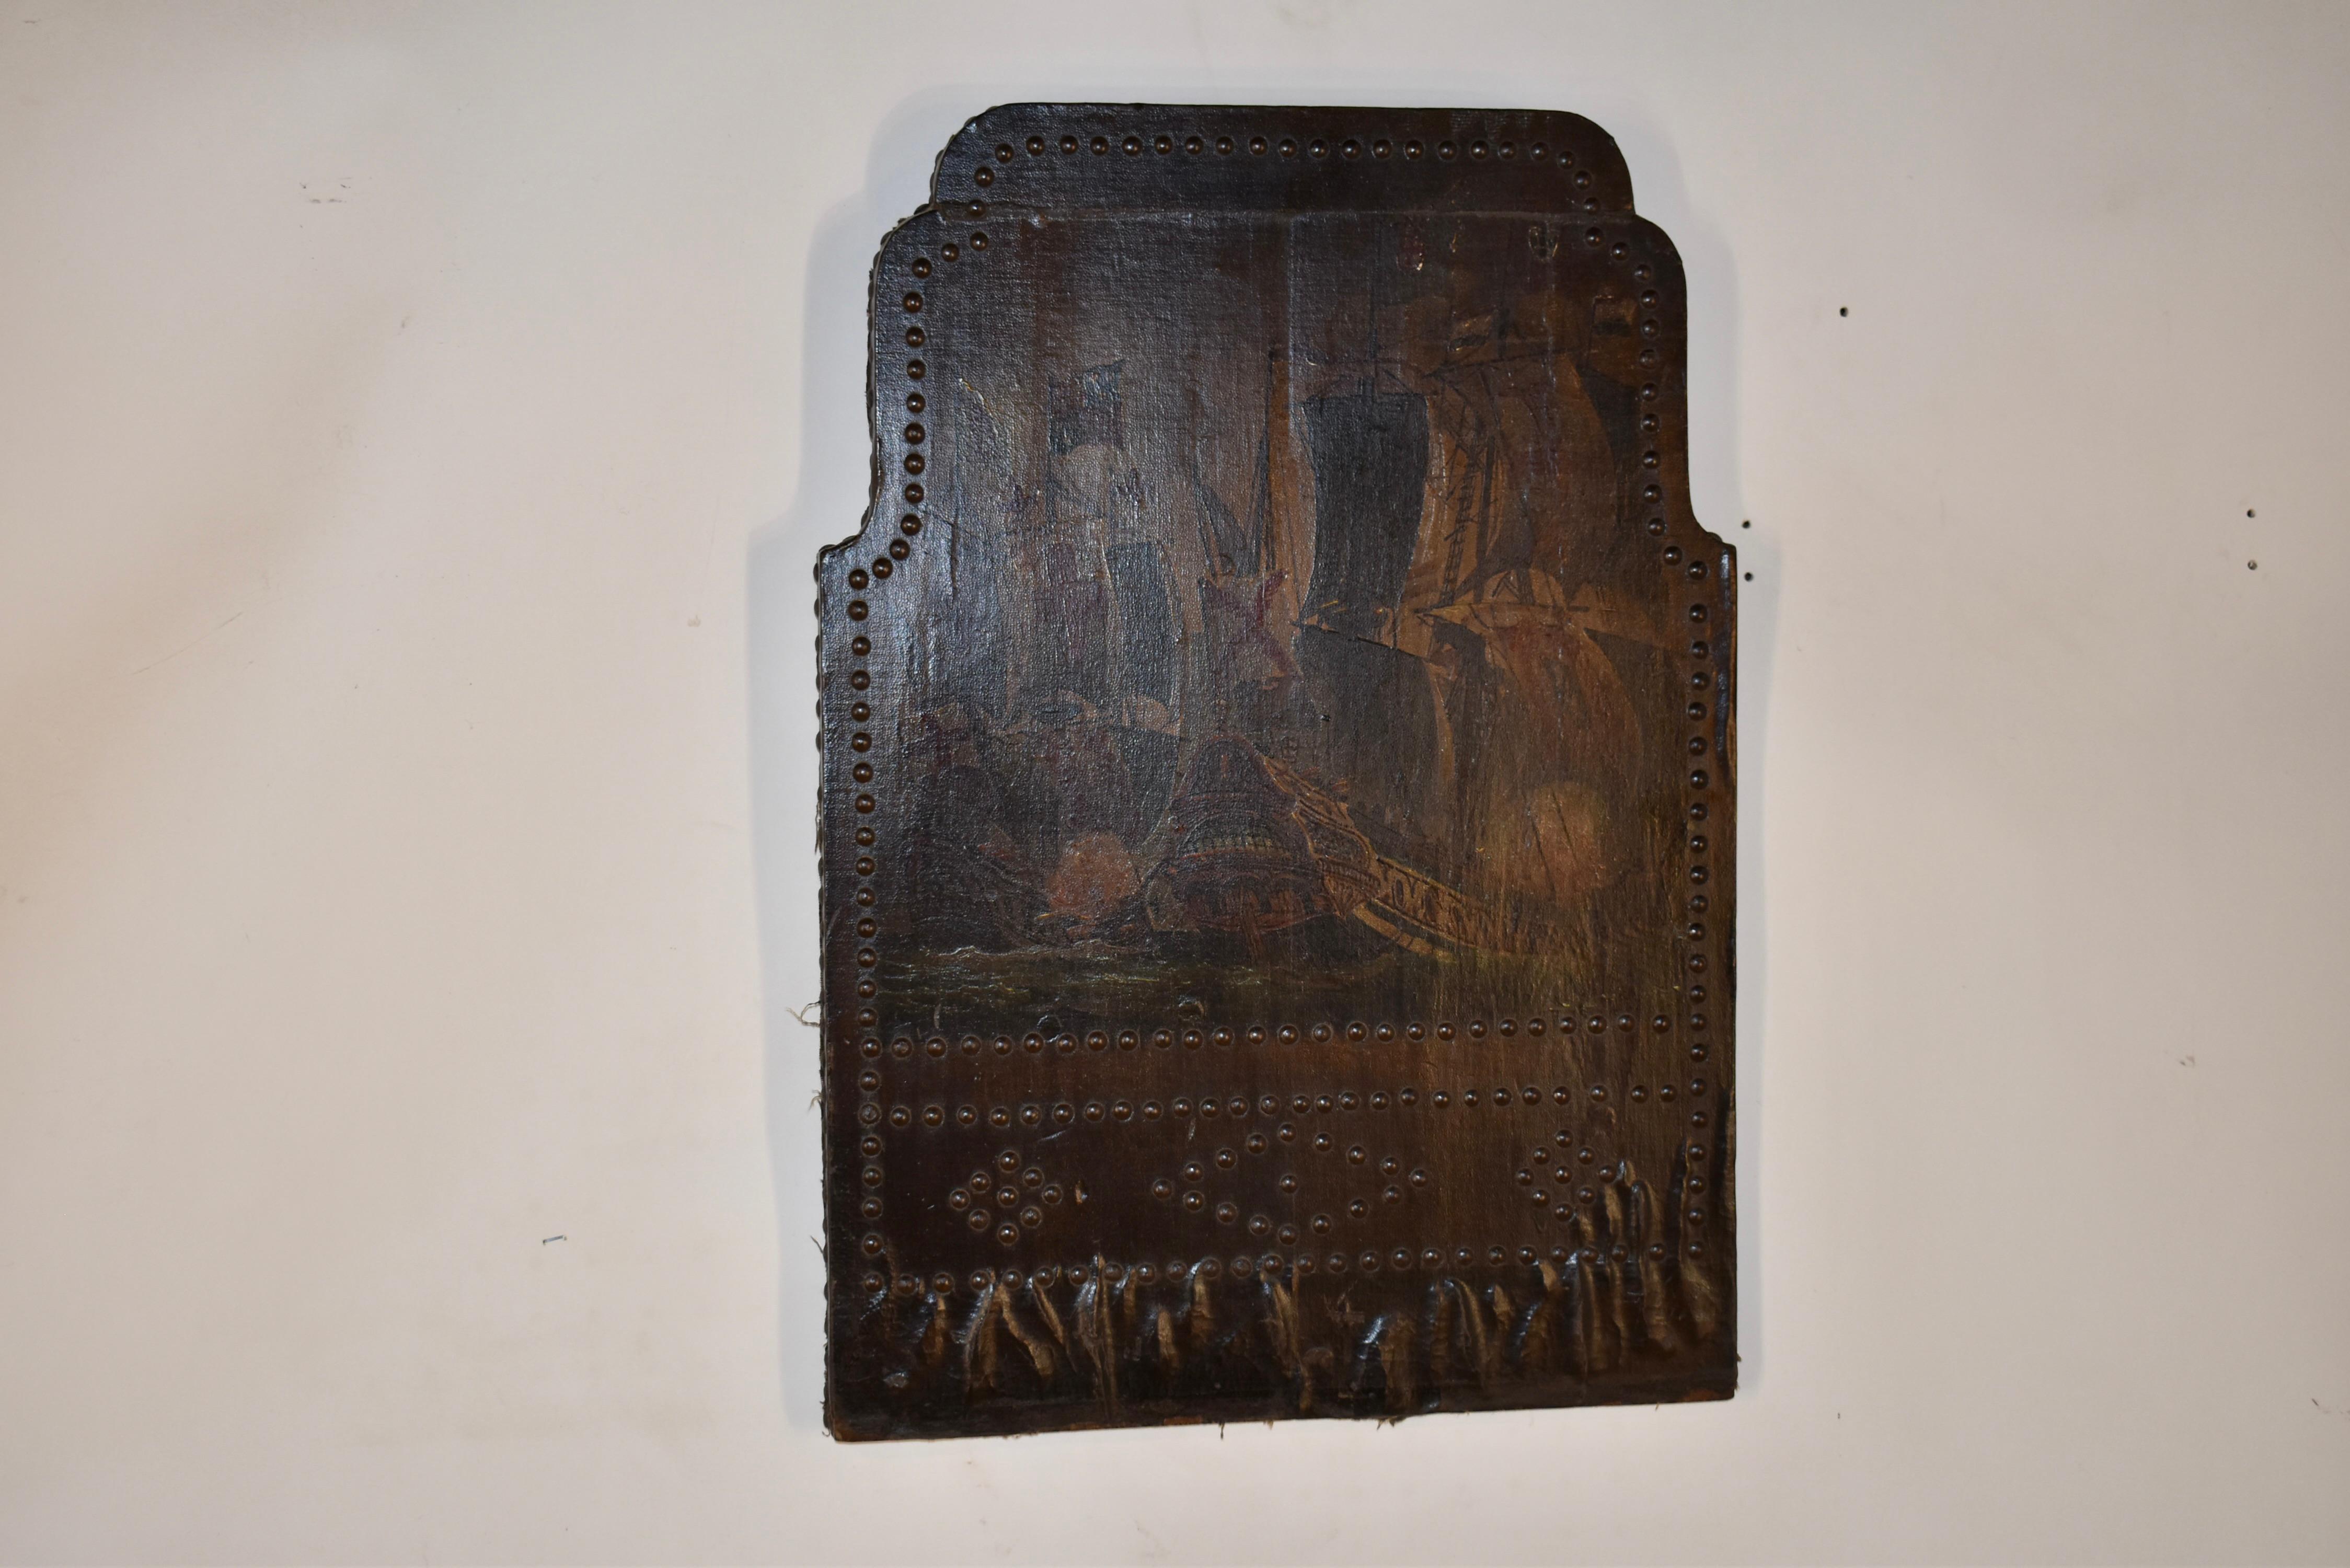 19th century English painting of ships.  The painting is composed on canvas over wood, and is reminiscent of the 18th century style of painting.  The frame is shaped and has beading detail with metal tacks around the frame for added design interest.